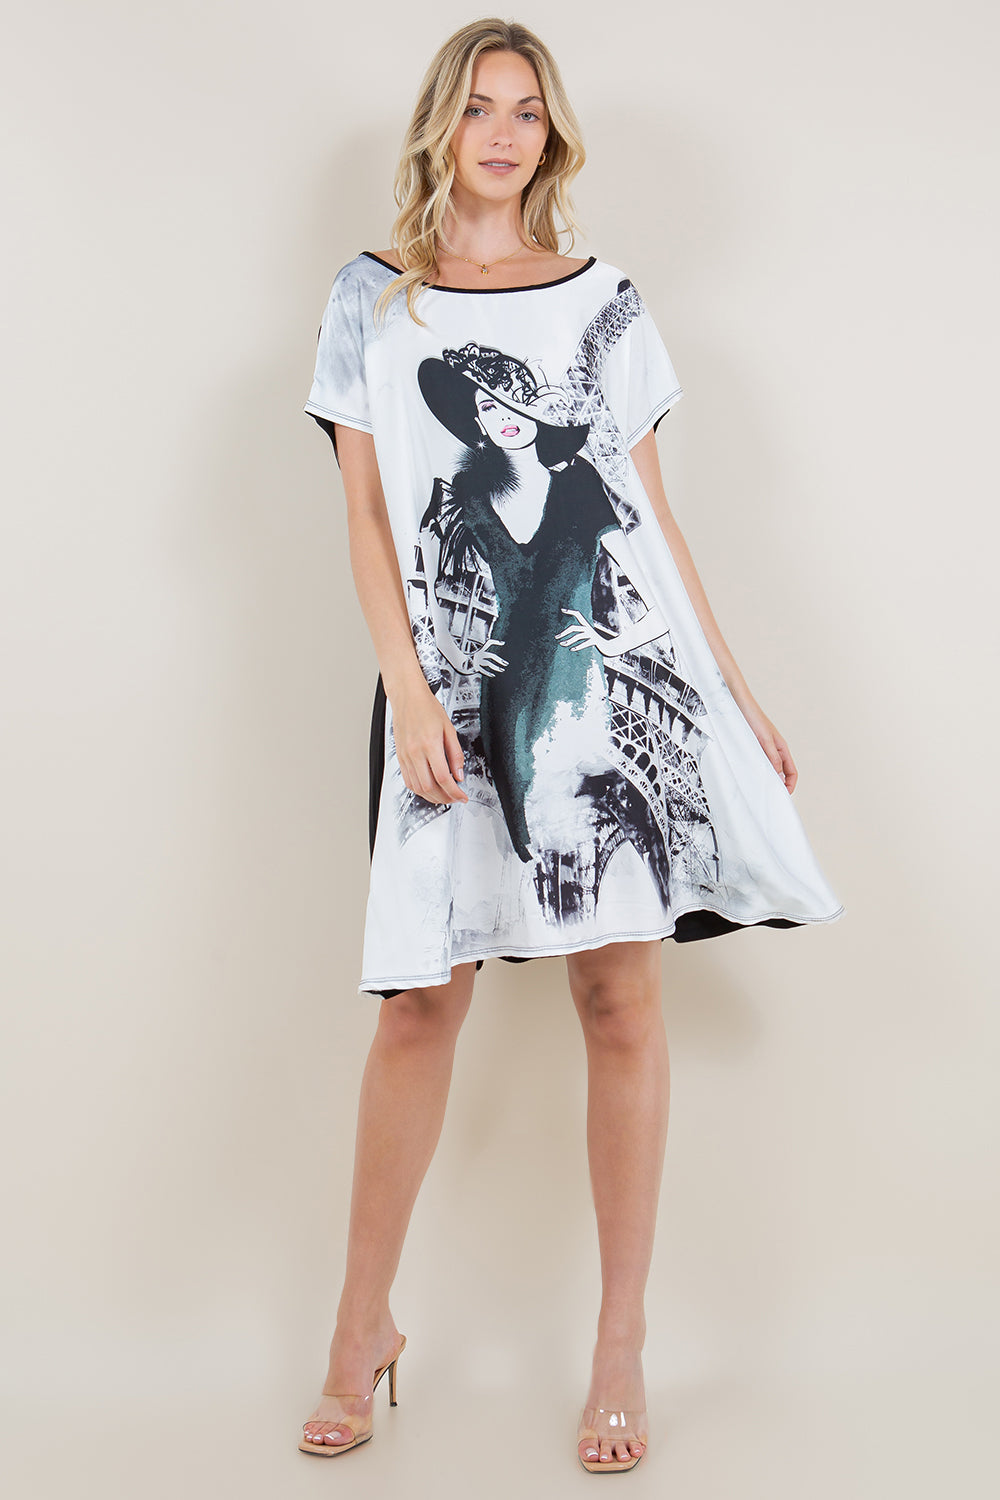 SS DOLMAN MIX MEDIA SUBLIMATED FRONT DRESS - D3376-LY2306C